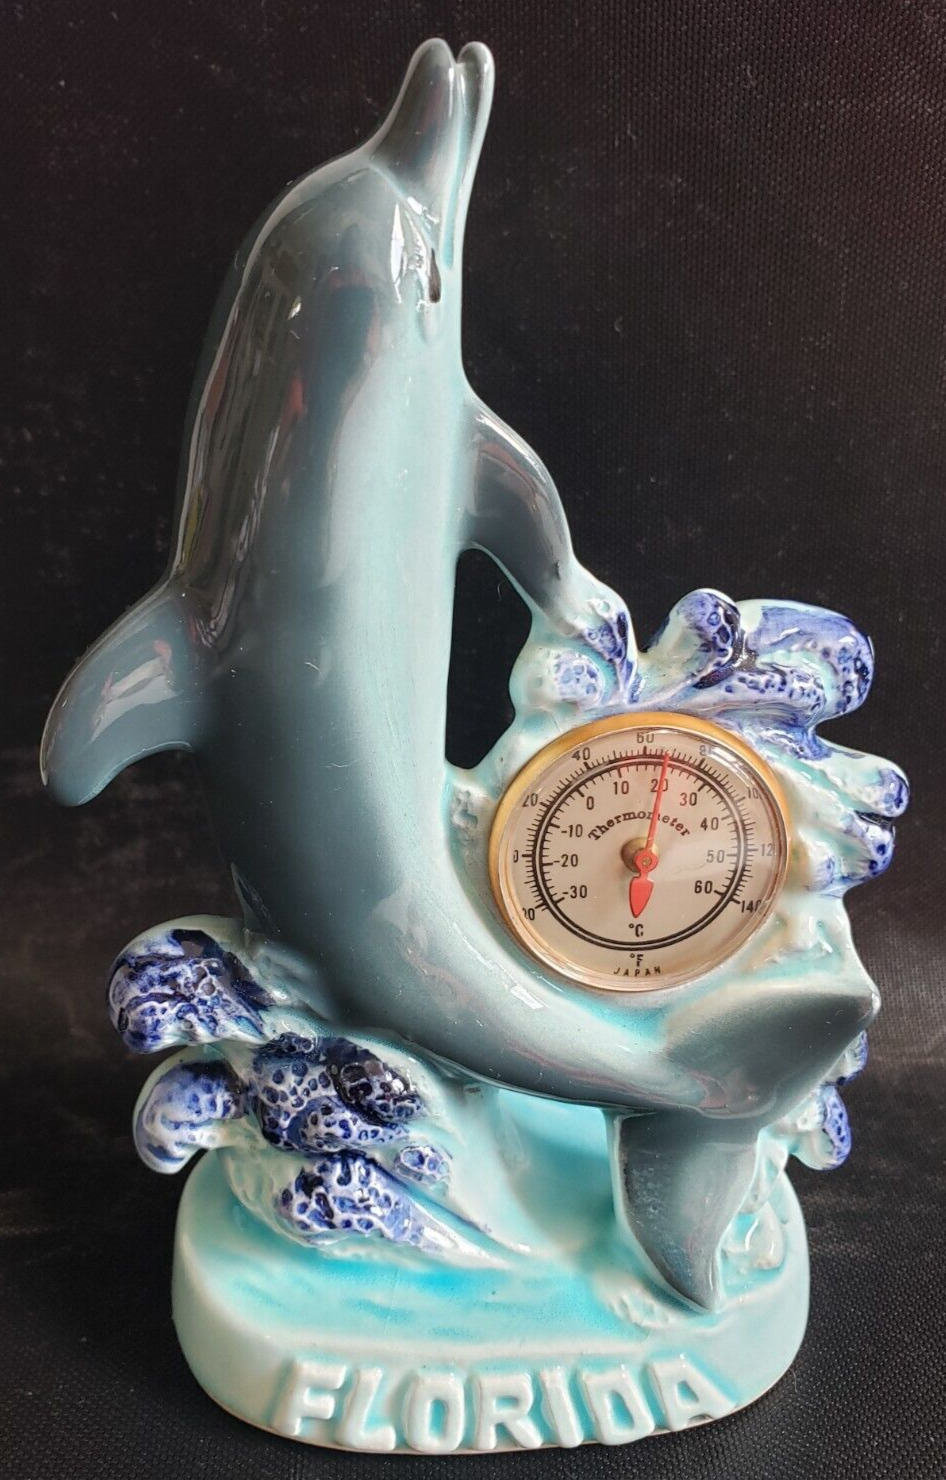 Vintage Florida Souvenir Ceramic Blue Dolphin Figurine with Working Thermometer 